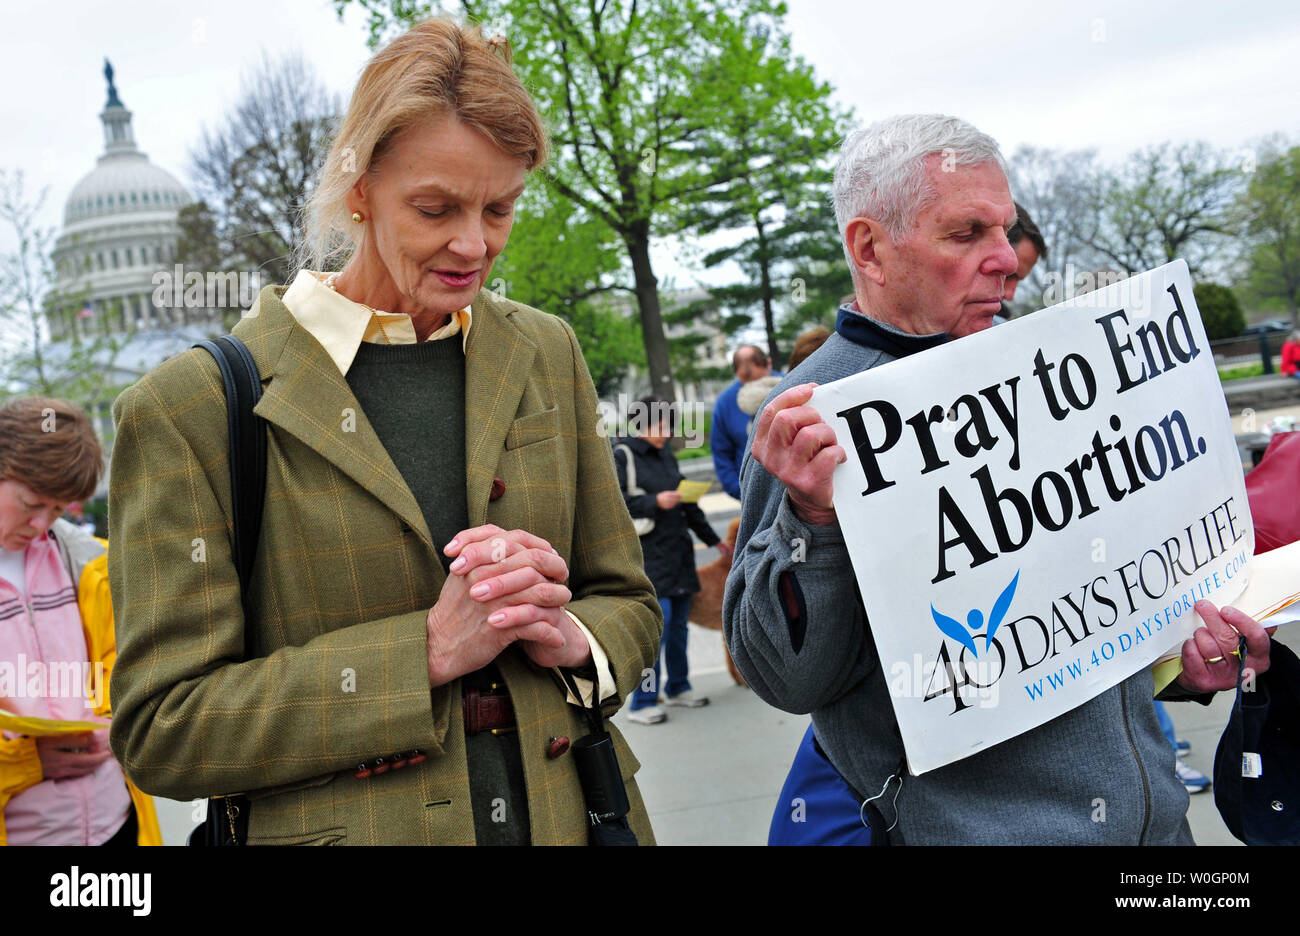 People pray in front of the United States Supreme Court during a rally against abortion a day before the Court will take up arguments on the constitutionality of President Obama's health care reform bill, in Washington, D.C. on March 25, 2012.   UPI/Kevin Dietsch Stock Photo